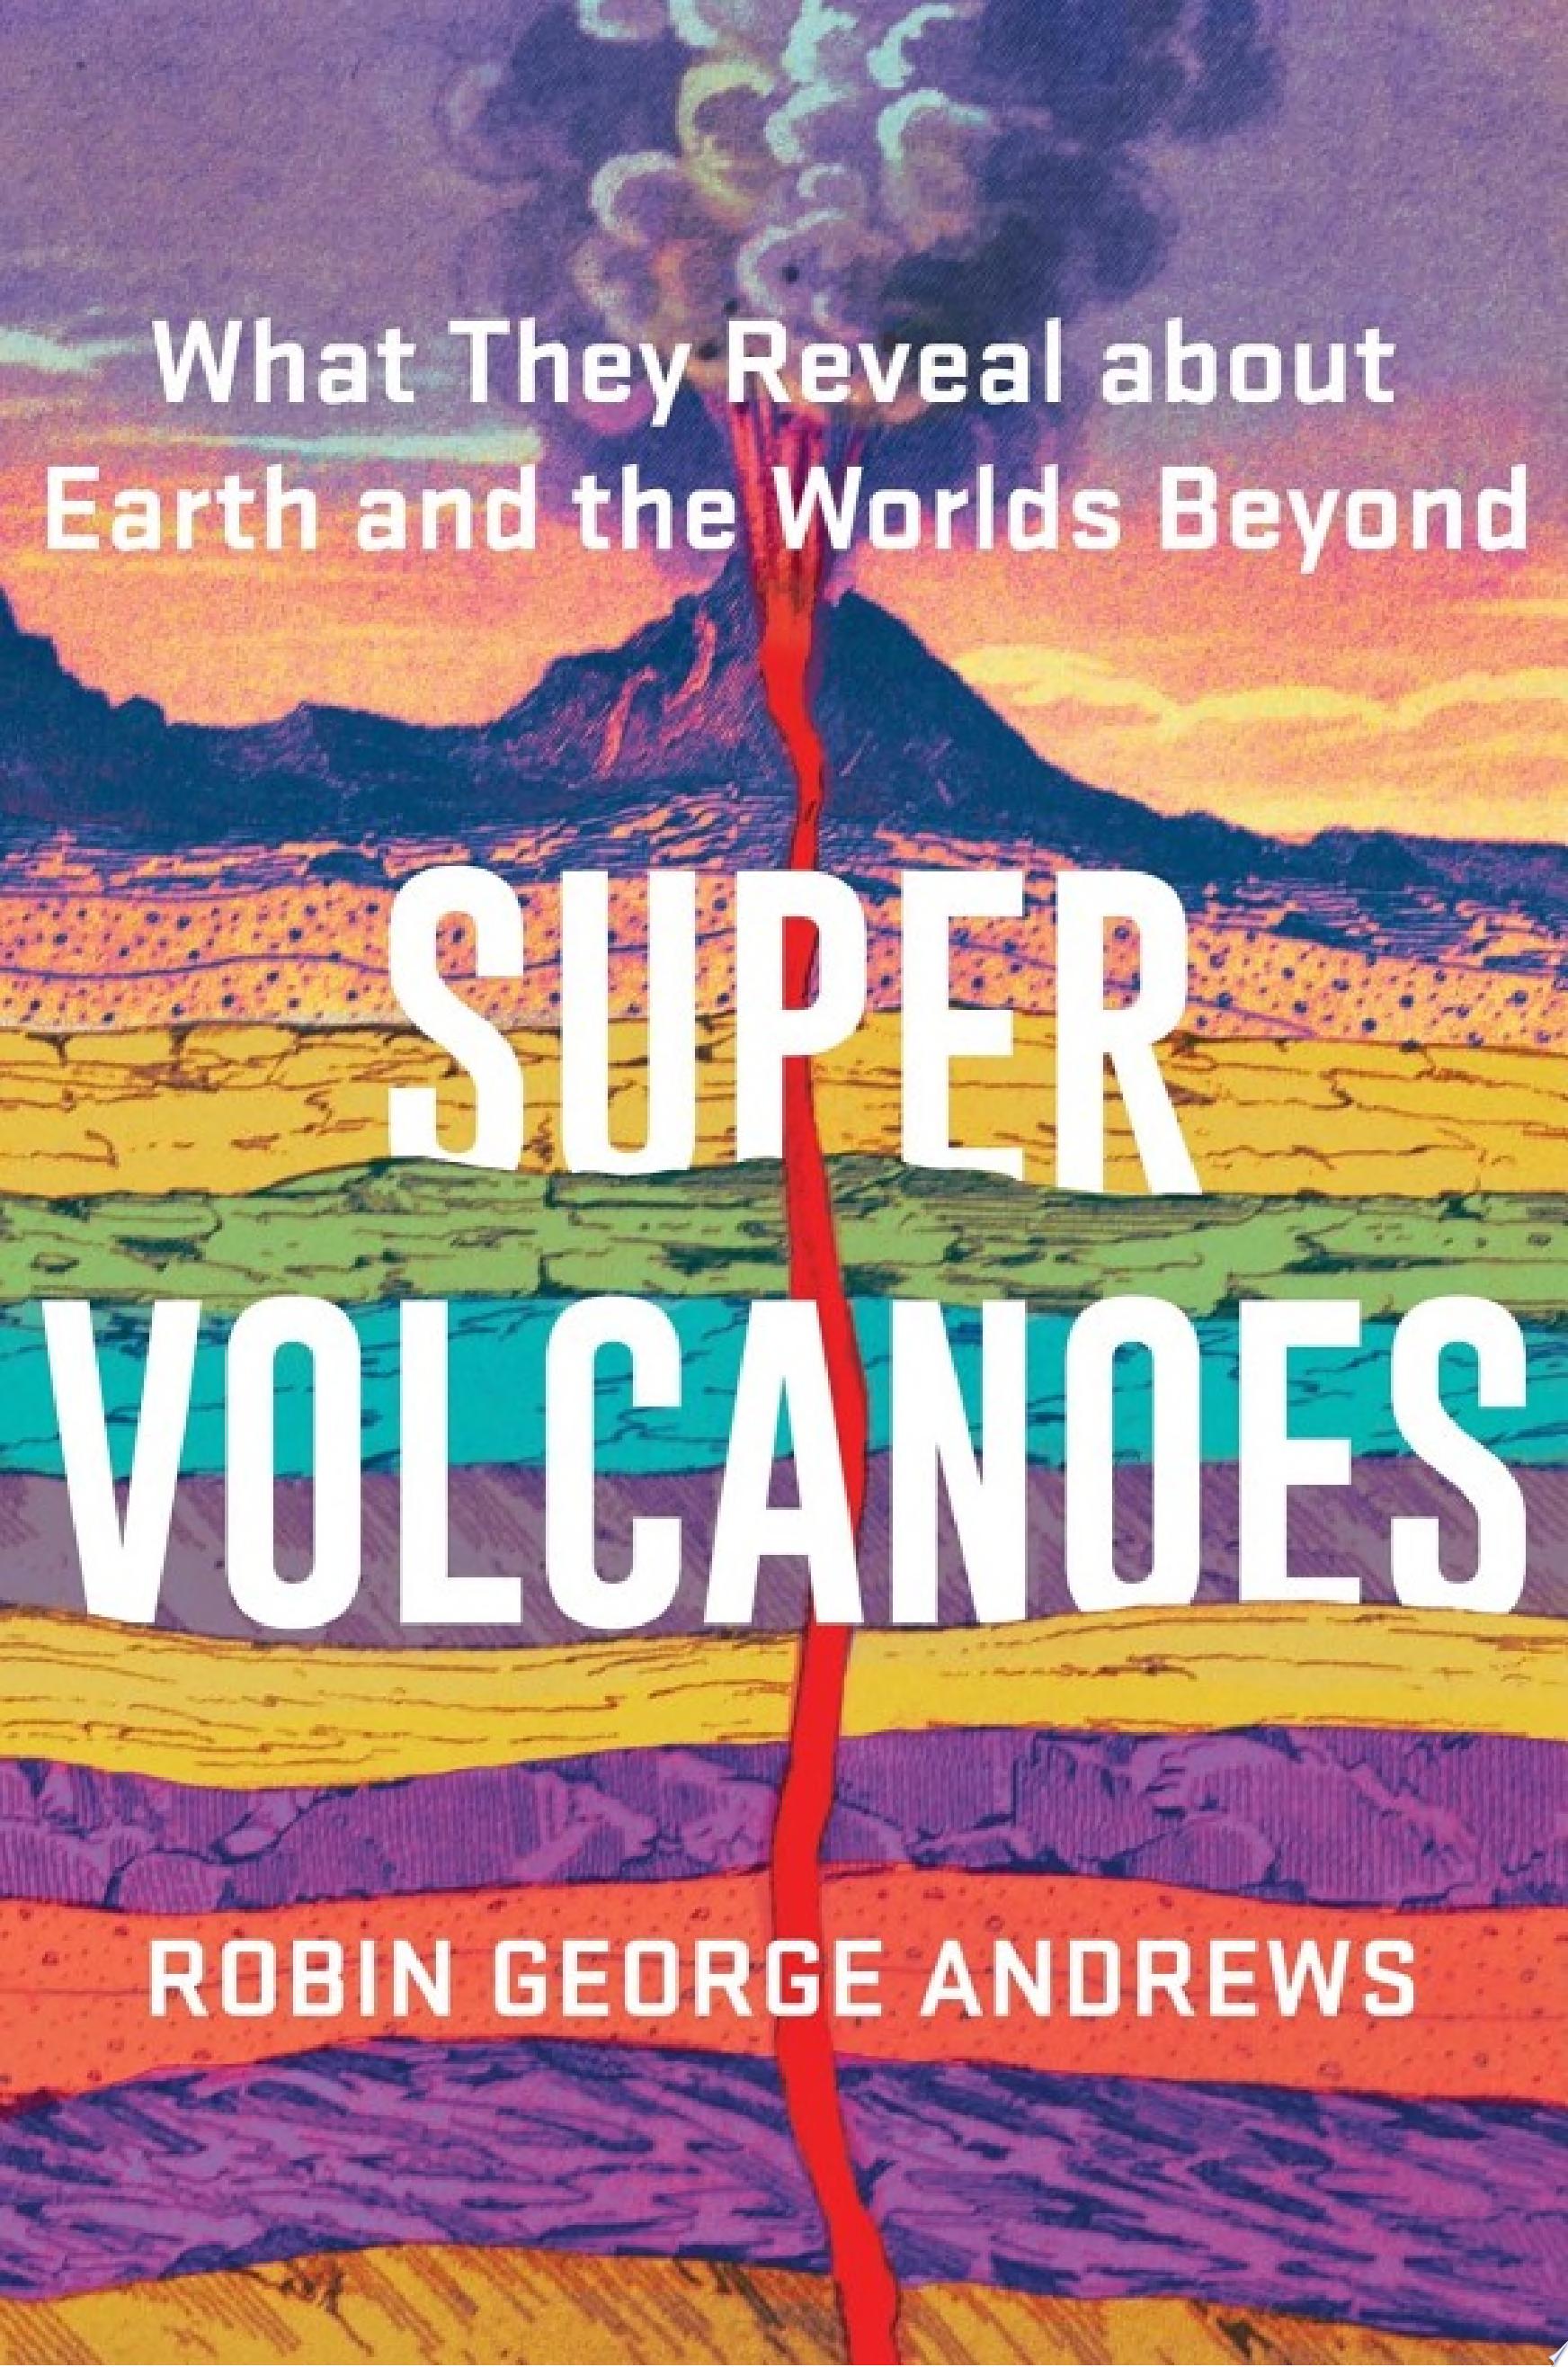 Image for "Super Volcanoes: What They Reveal about Earth and the Worlds Beyond"